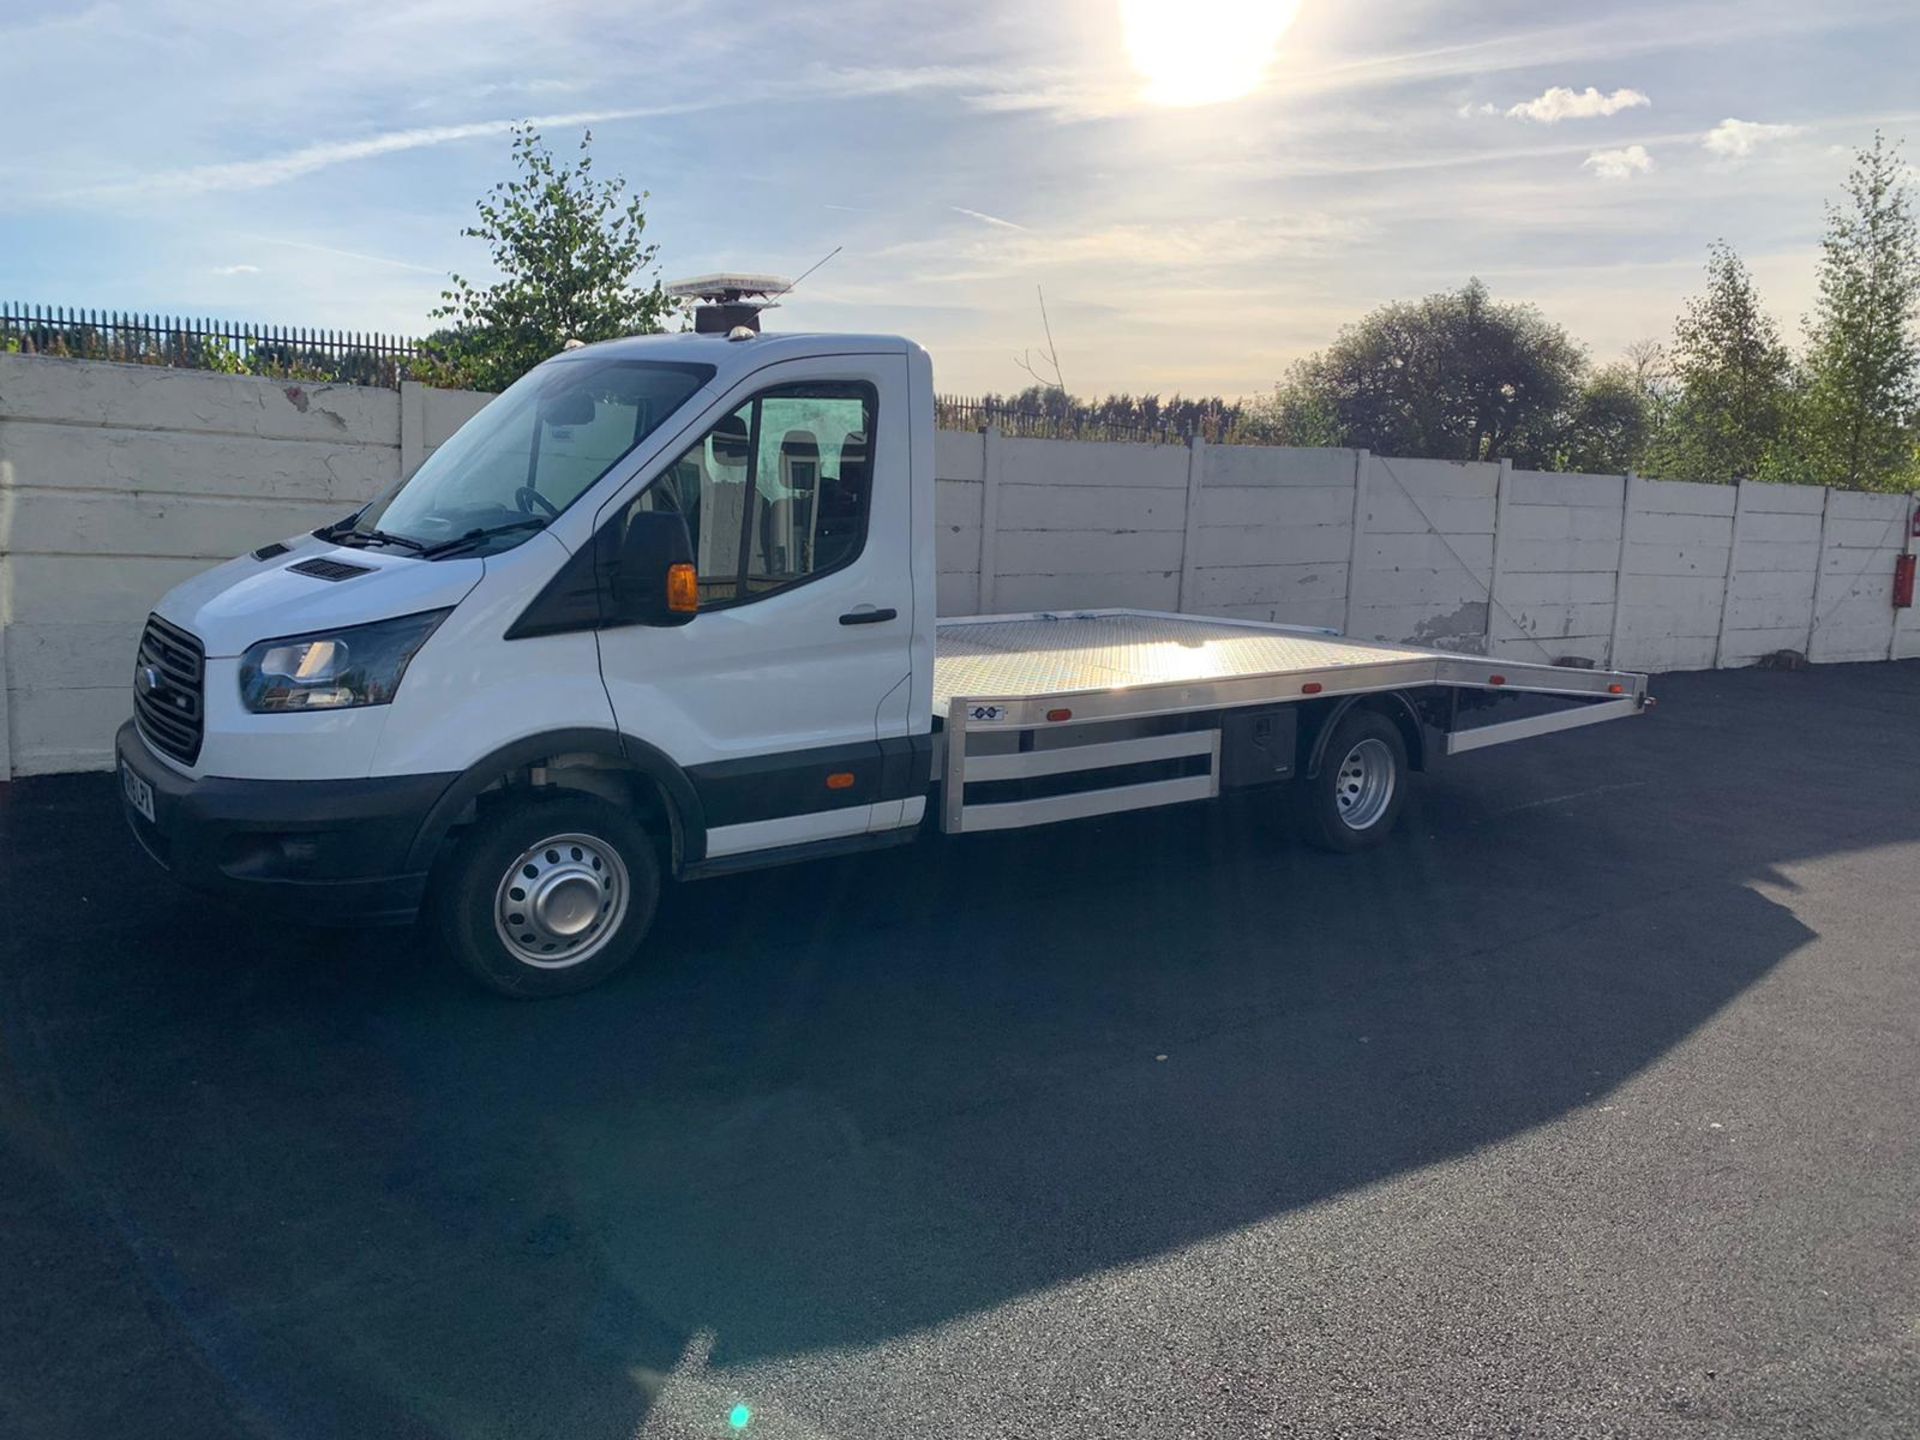 Ford transit recovery truck 2019 - Image 9 of 10